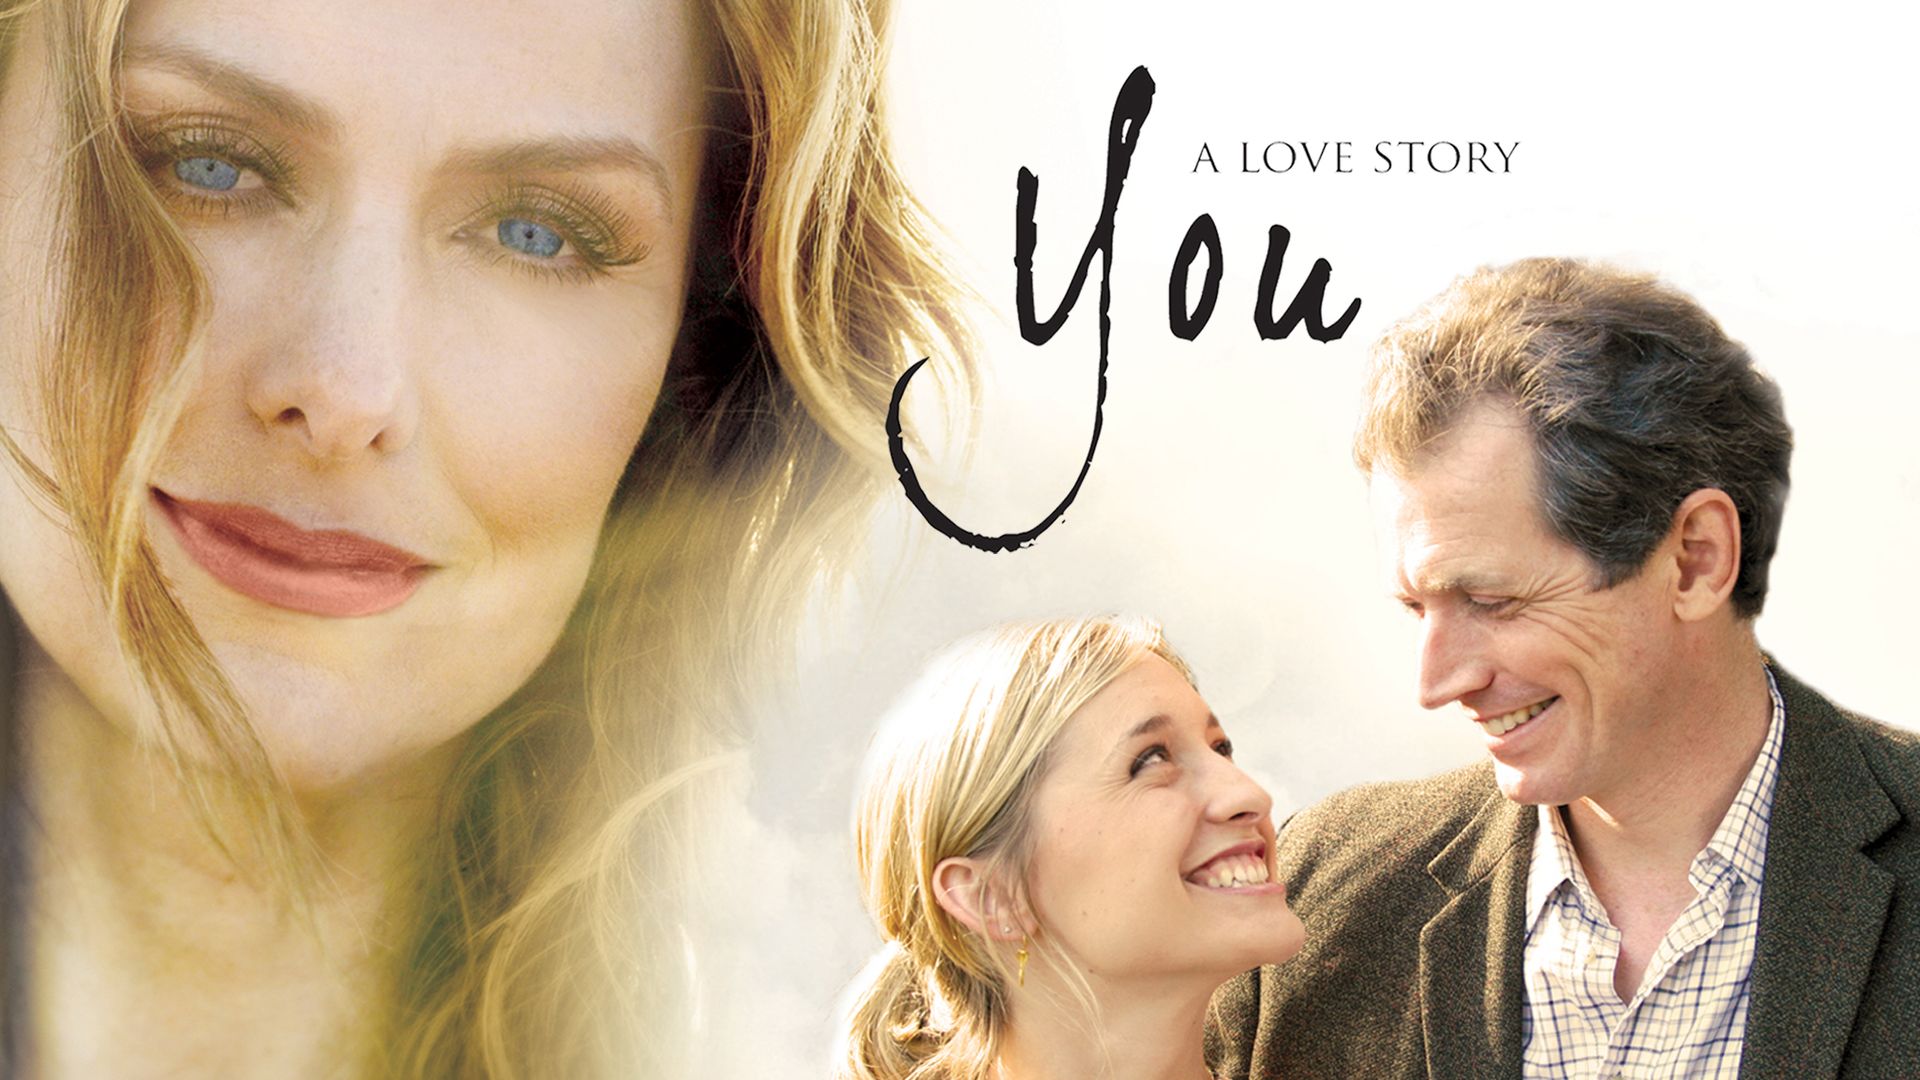 You (2009): Where to Watch and Stream Online